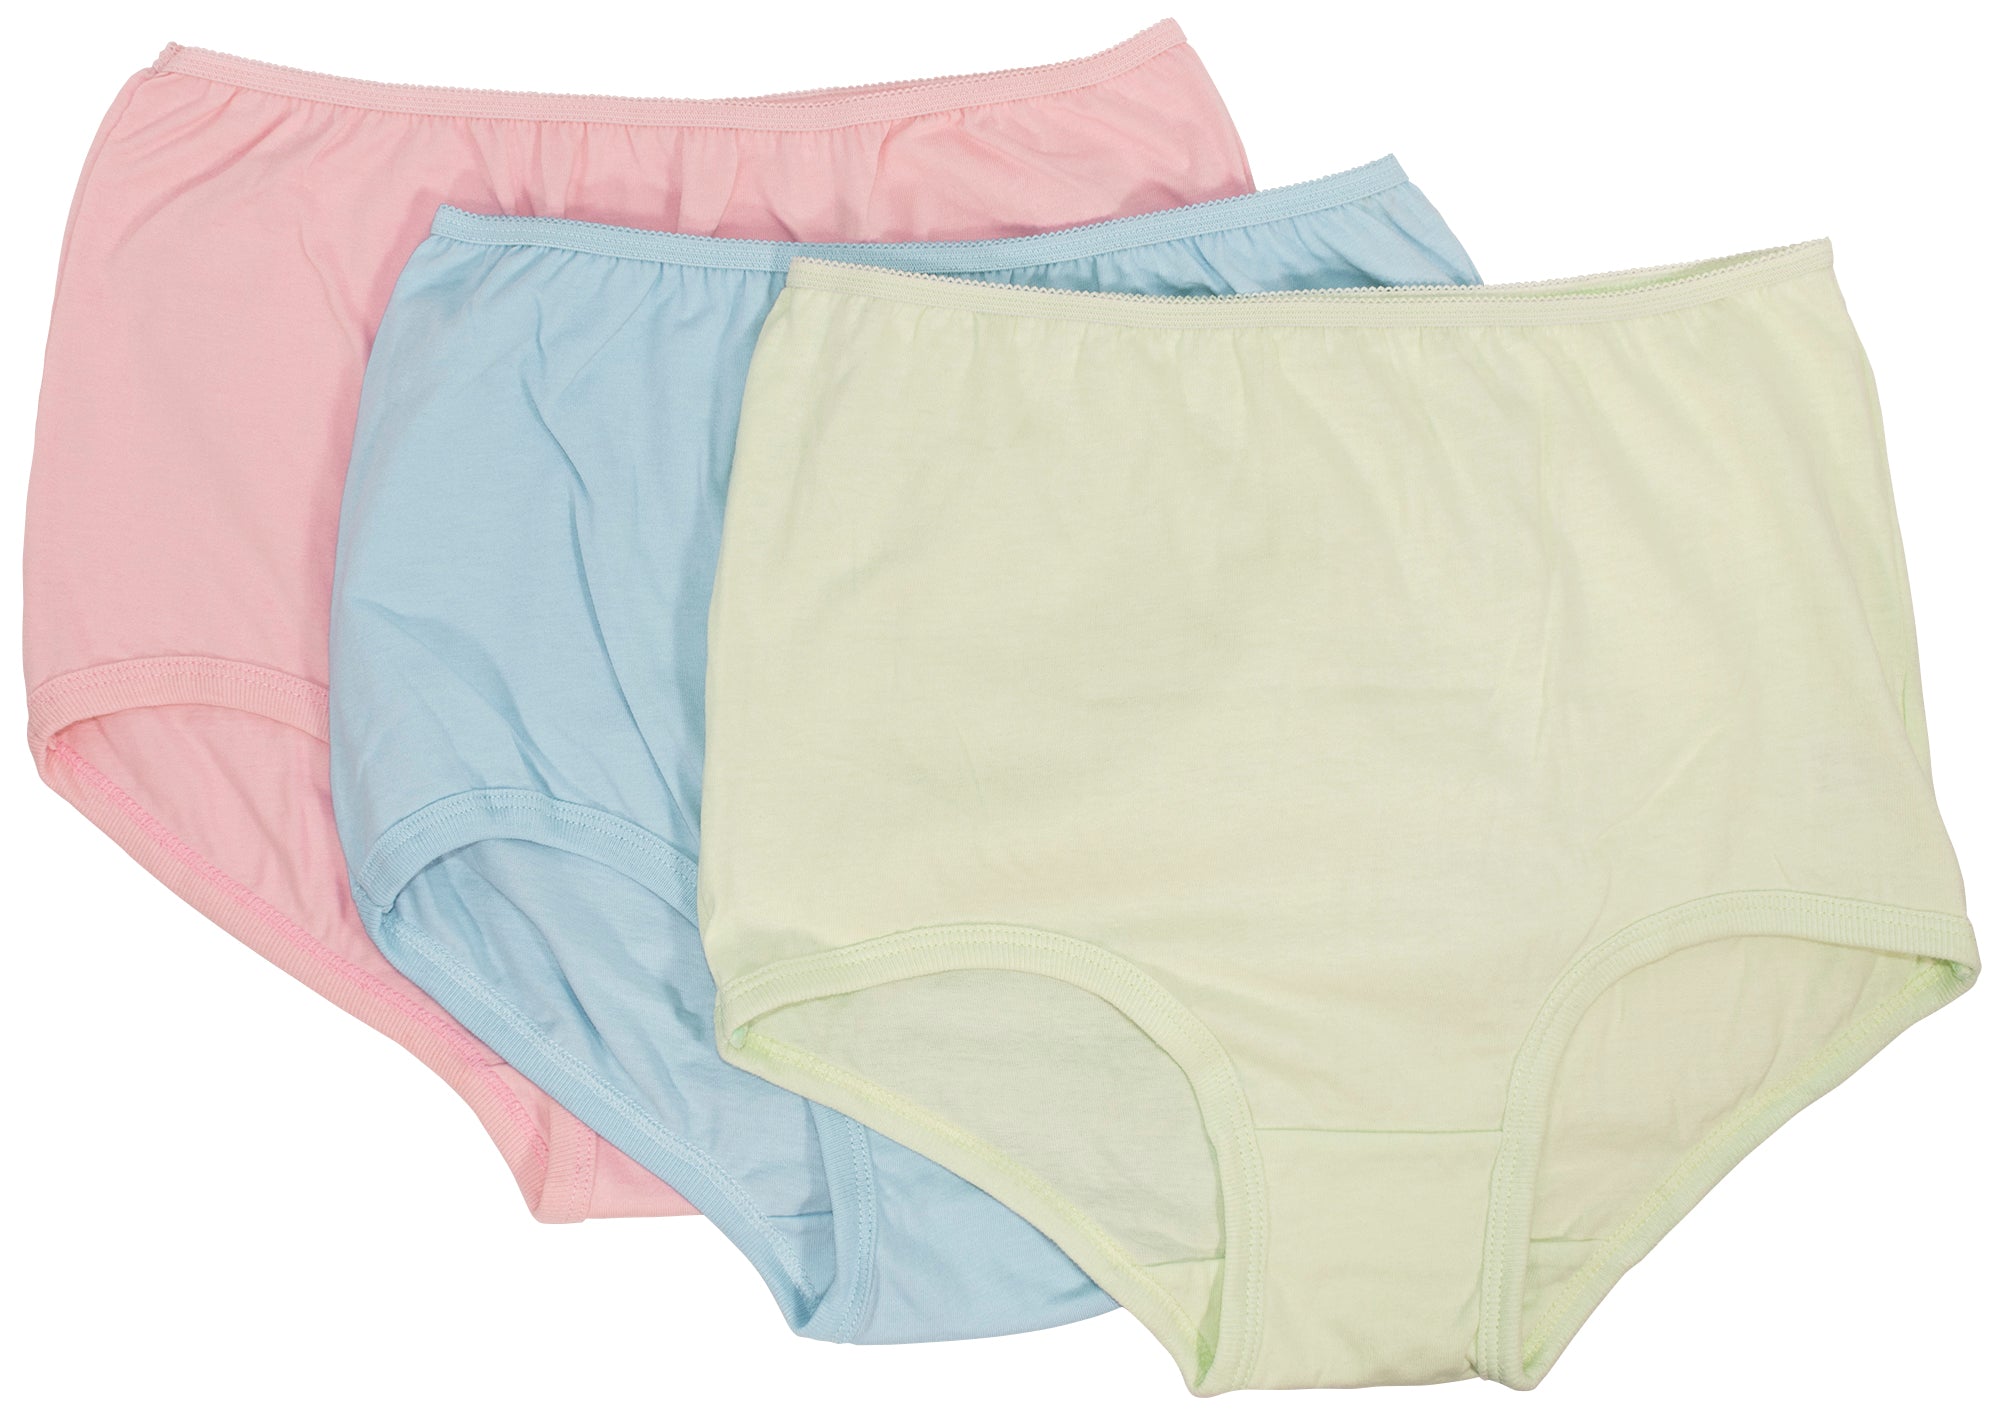 Cuff Leg Panty Assorted Color Three Pack (100% Cotton)